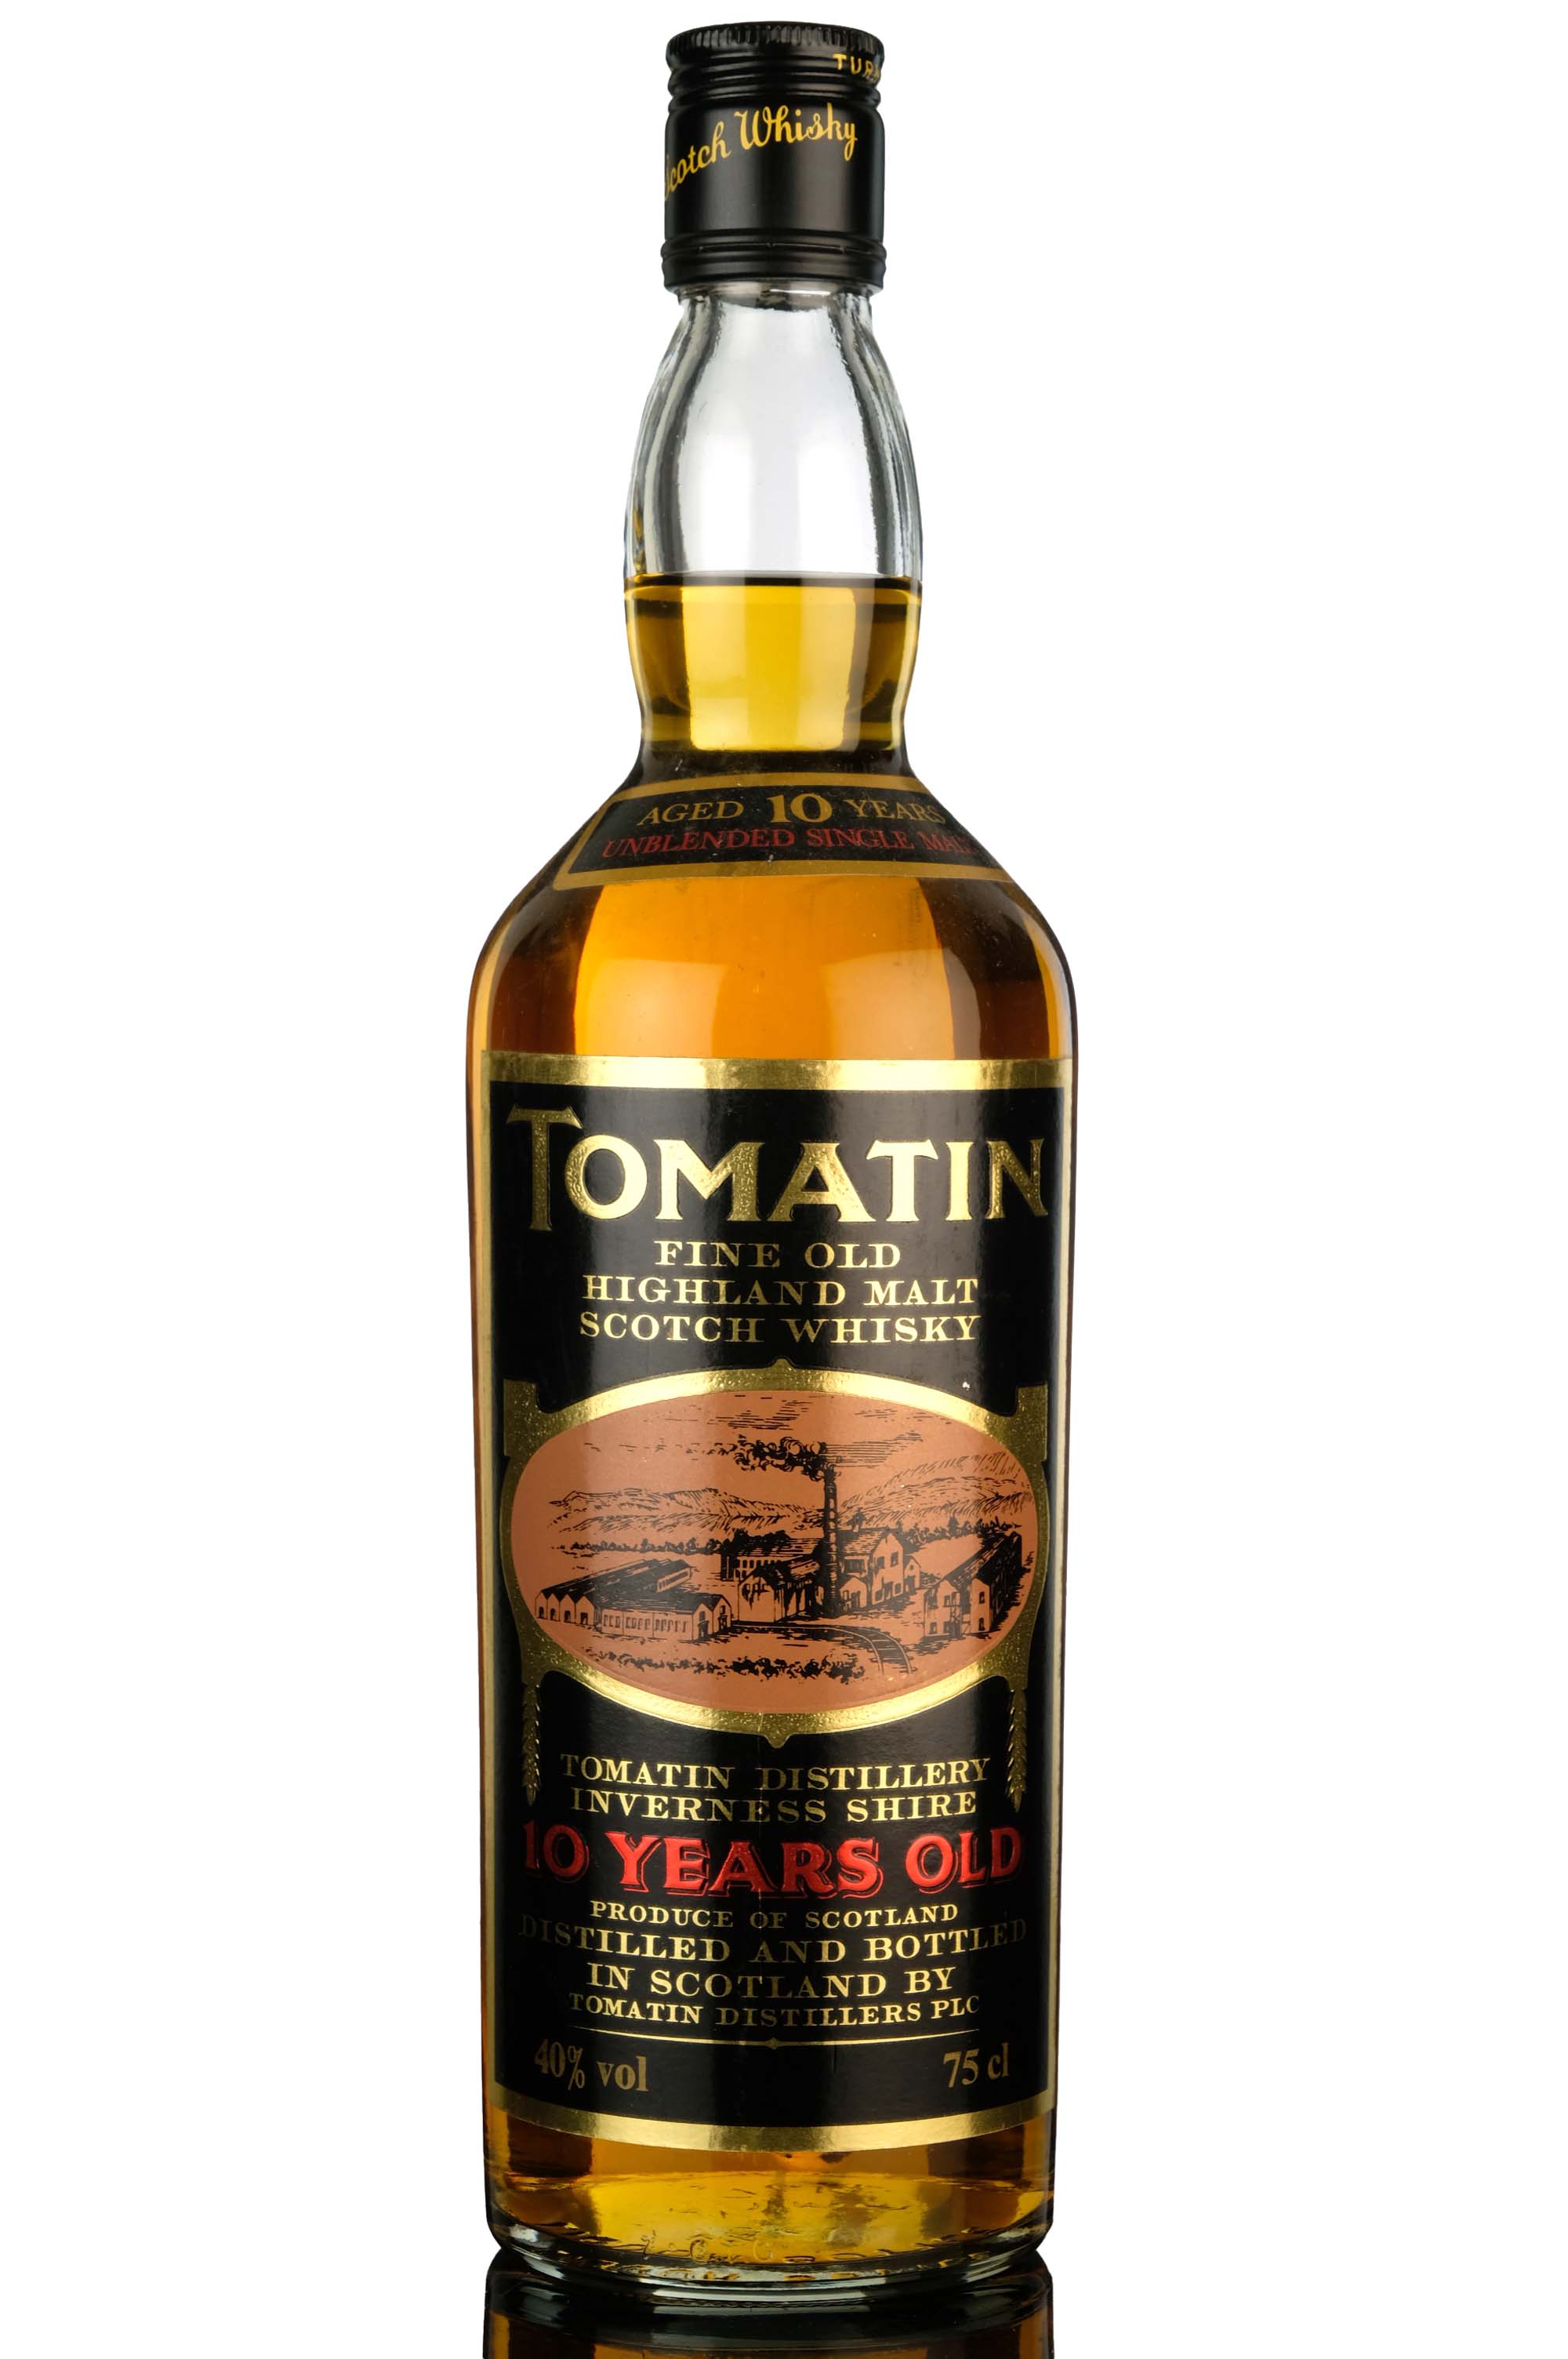 Tomatin 10 Year Old - 1980s